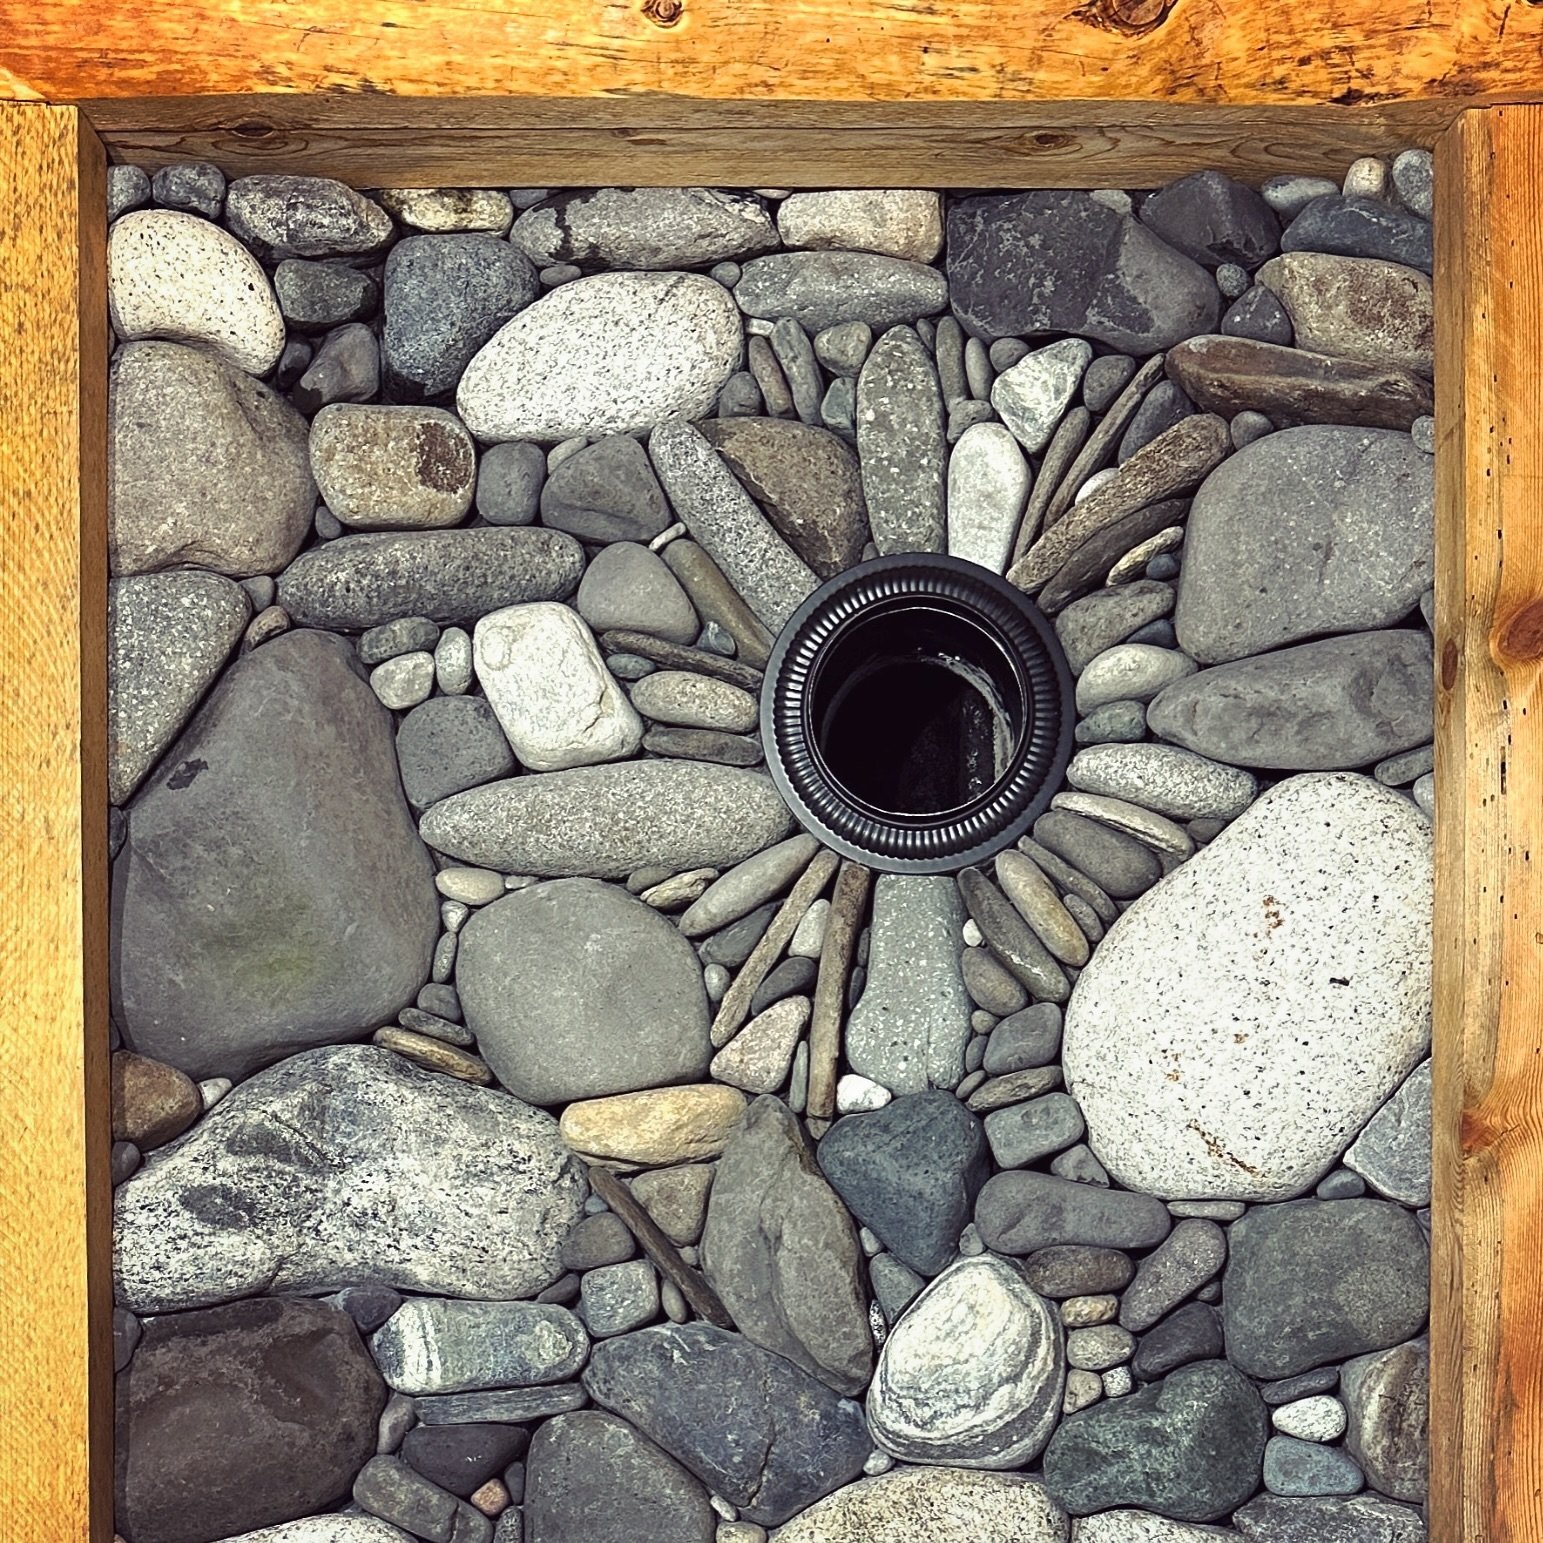 Stone framed with wood and a metal stove pipe framed with stone #millerstoneworks #stone #stoneart #stonework #stonemasonry #stonemason #naturalstone #drystackstone #design #stonedesign #construction #contractor #masonrycontractor #masonry #stonefire